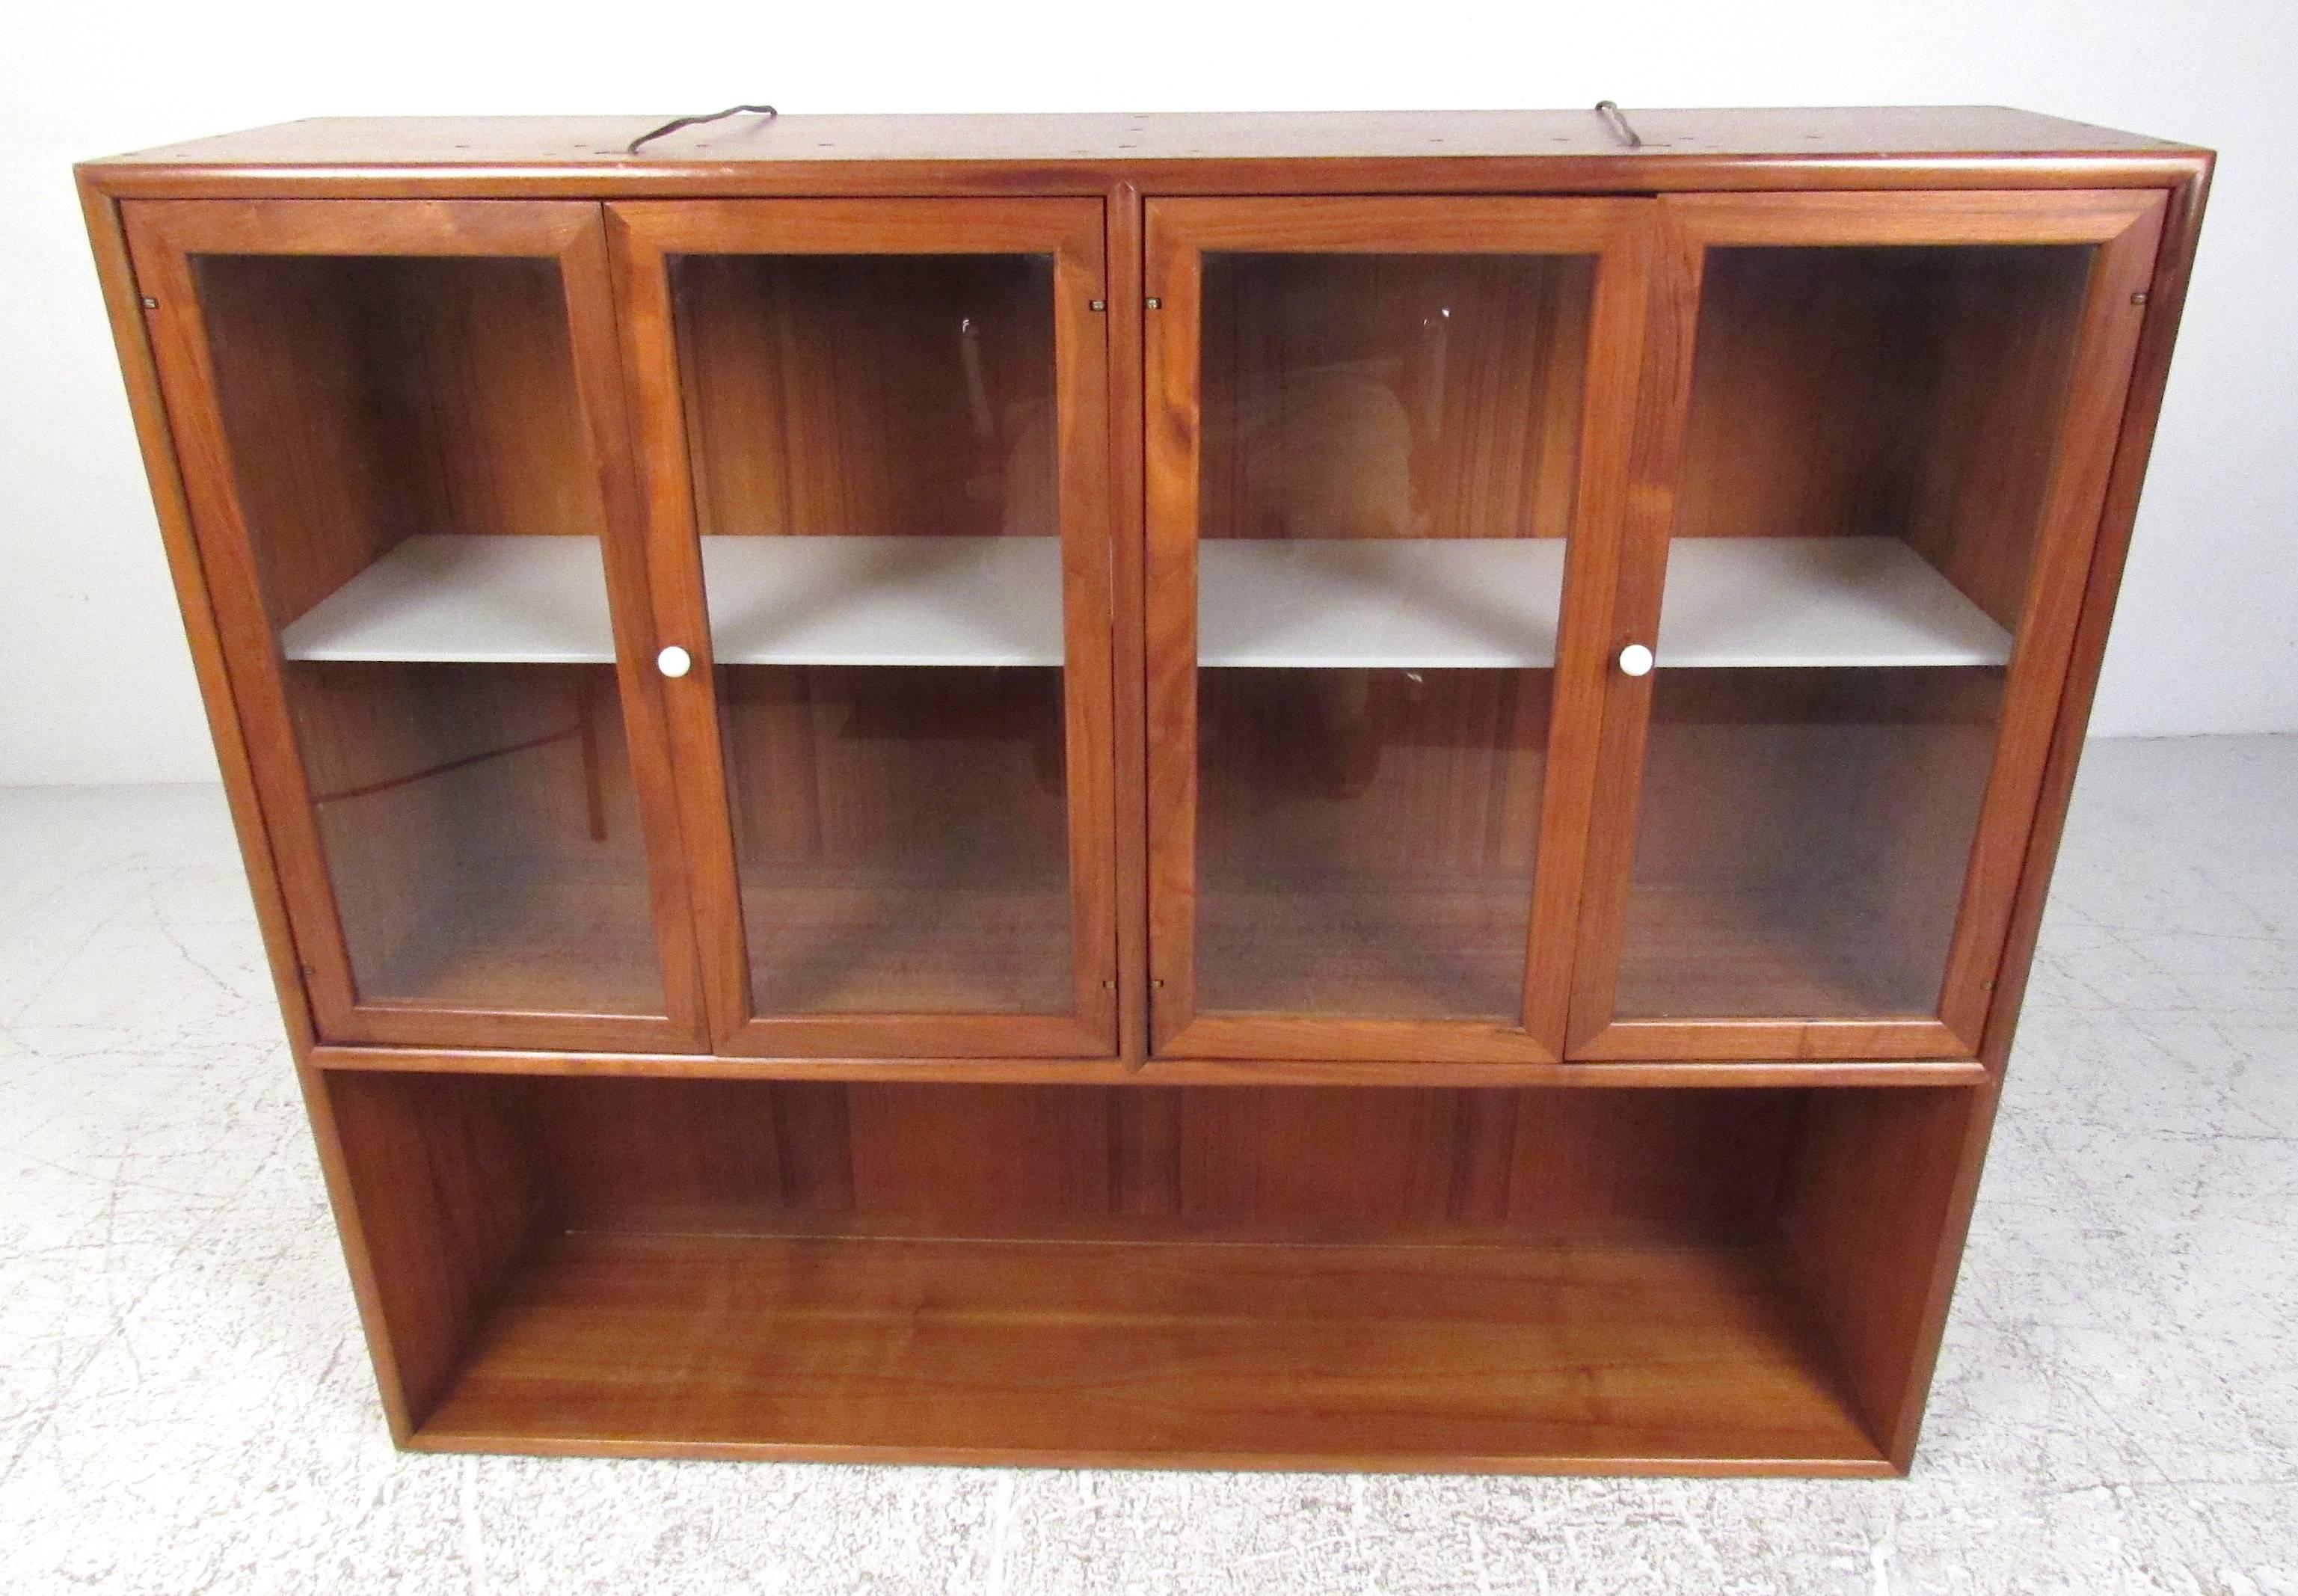 Four-door walnut China cabinet featuring internal lights, four adjustable shelves, porcelain pulls and plate groove for display. Matching server available (see photo). Please confirm item location (NY or NJ) with dealer.